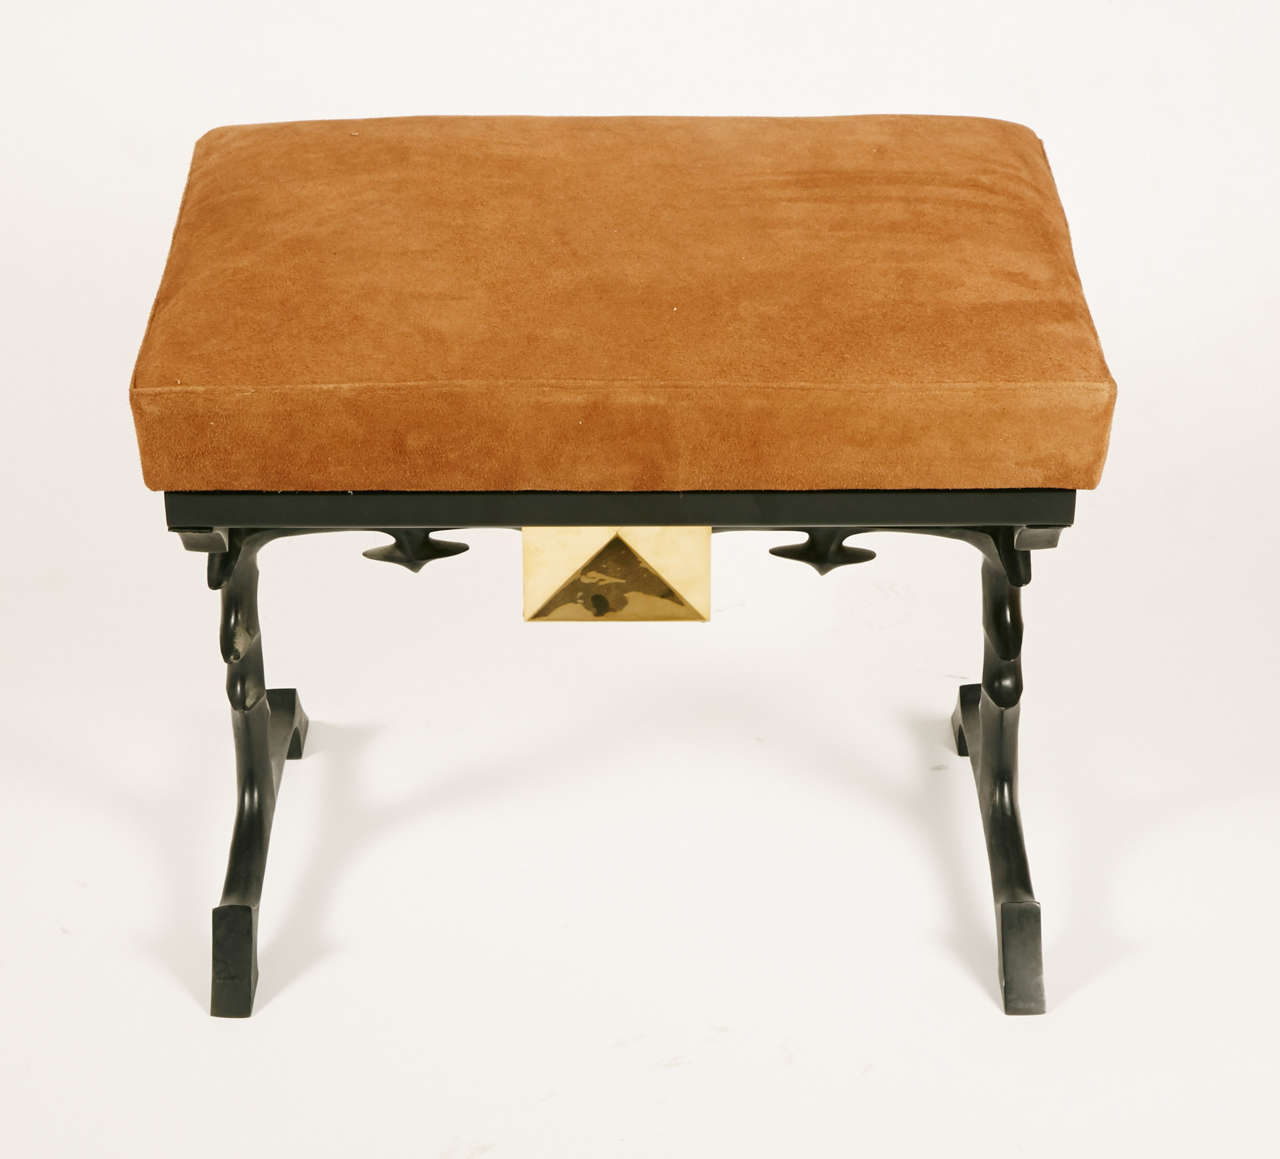 1970s fantastic stools in solid bronze upholstered with suede.